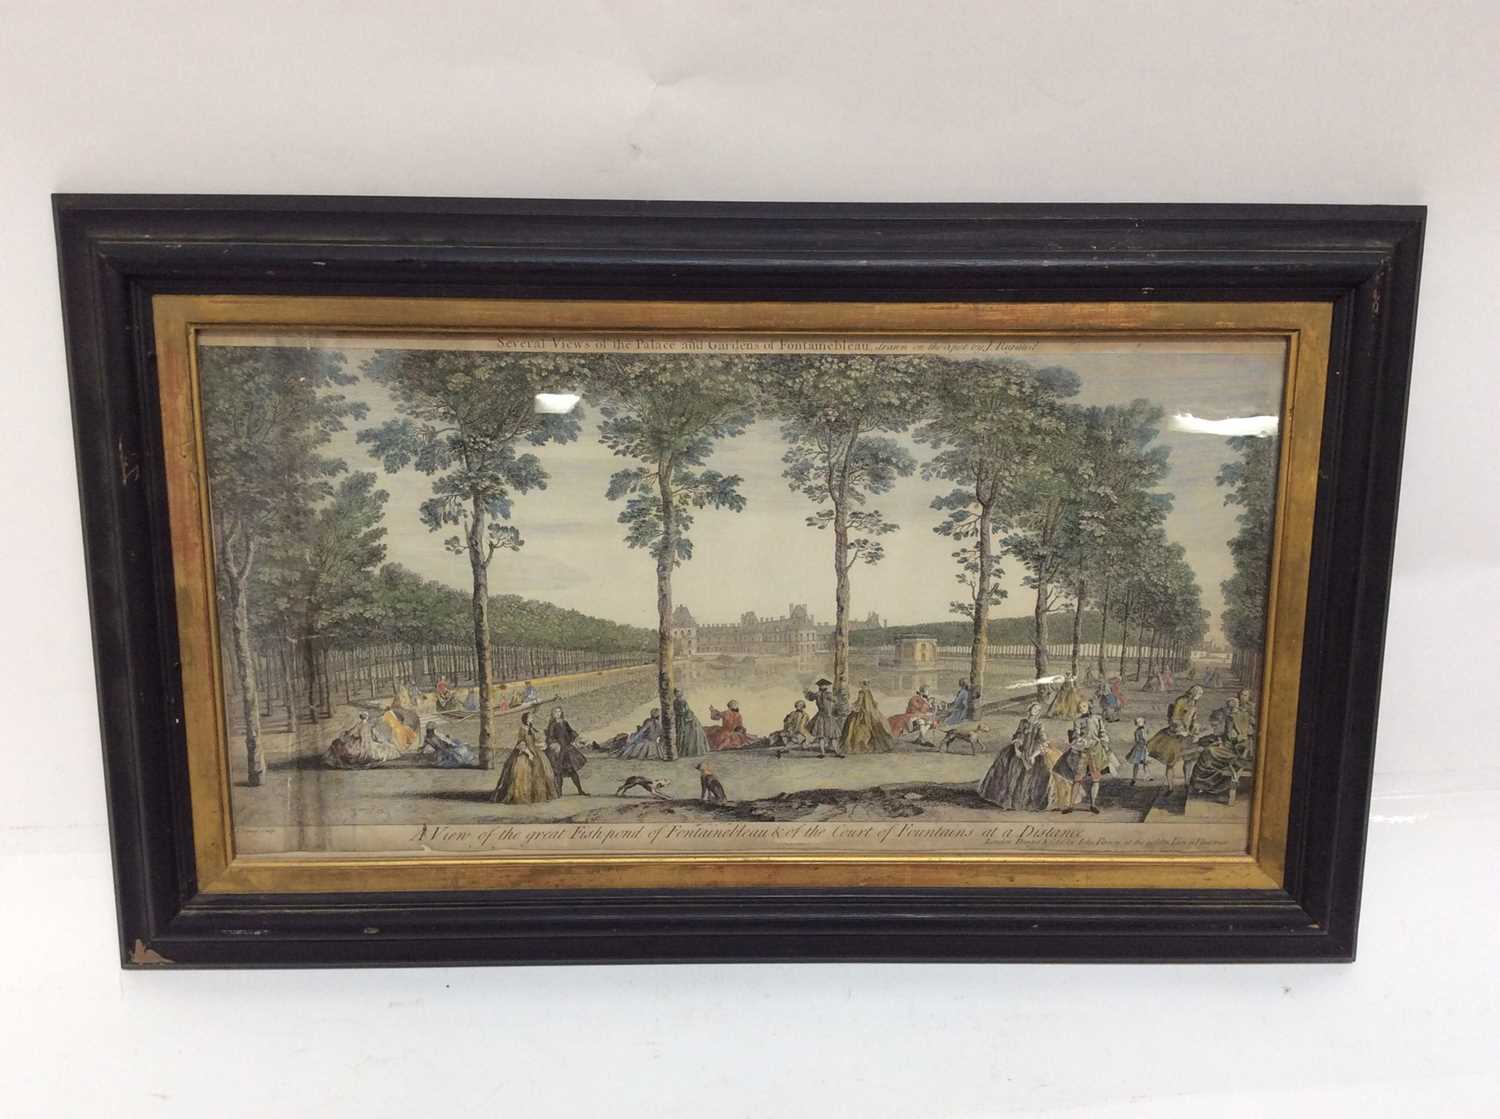 Lot 64 - 18th century John Tinney hand coloured engraving- A View of the great Fish-pond of Fontainebleau & of the Court of Fountains at a Distance and one other engraving- Architecture, both framed